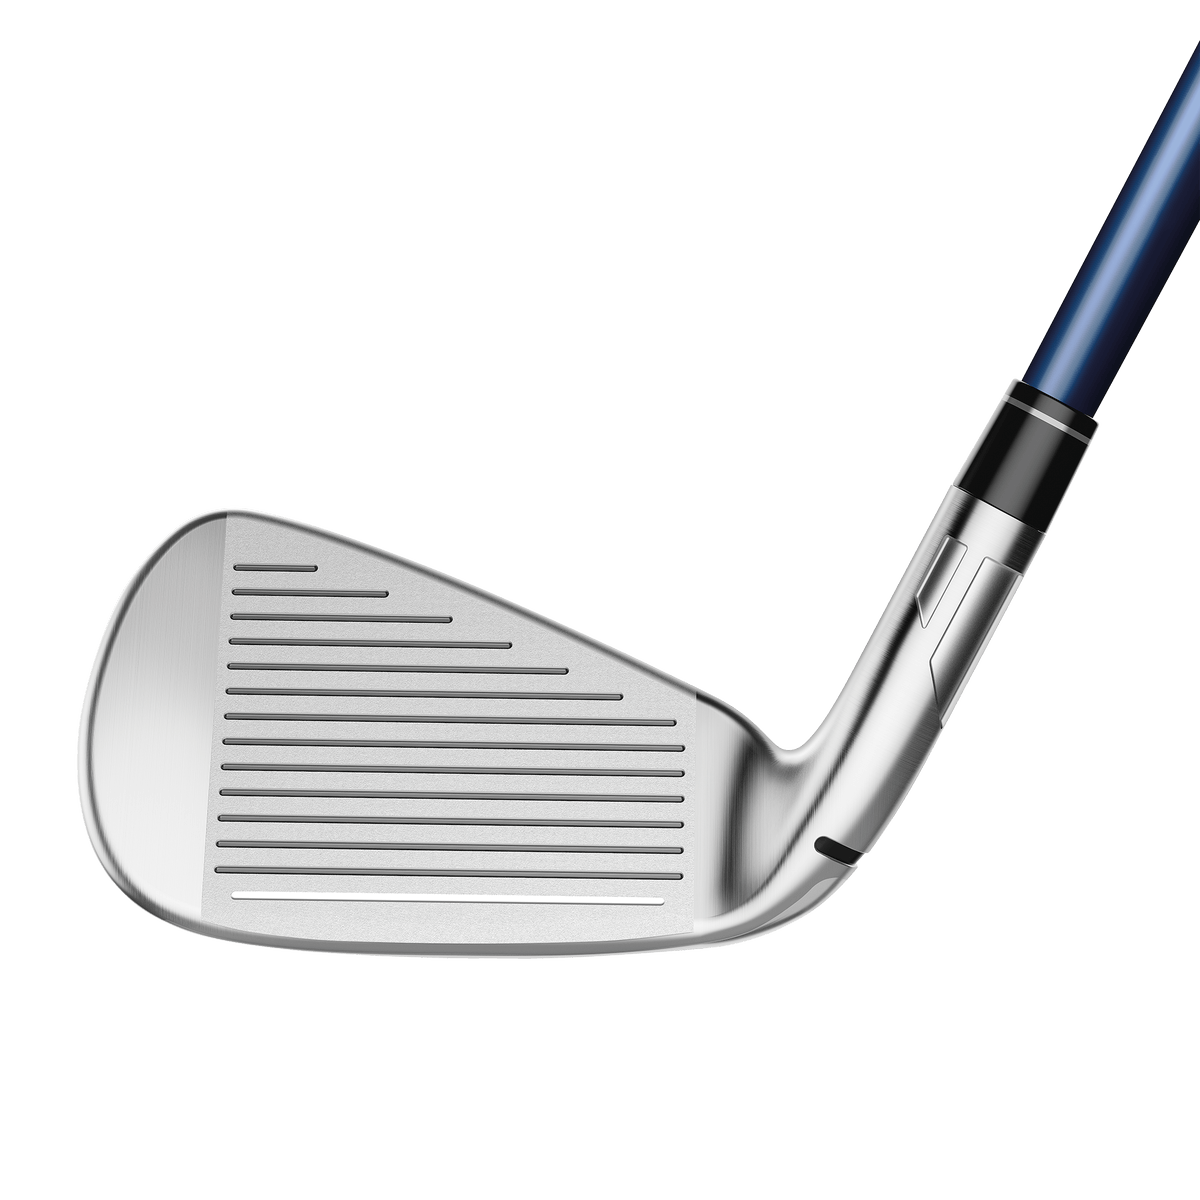 TaylorMade SIM2 Max OS Irons · Right handed · Graphite · Senior · 5-PW,AW